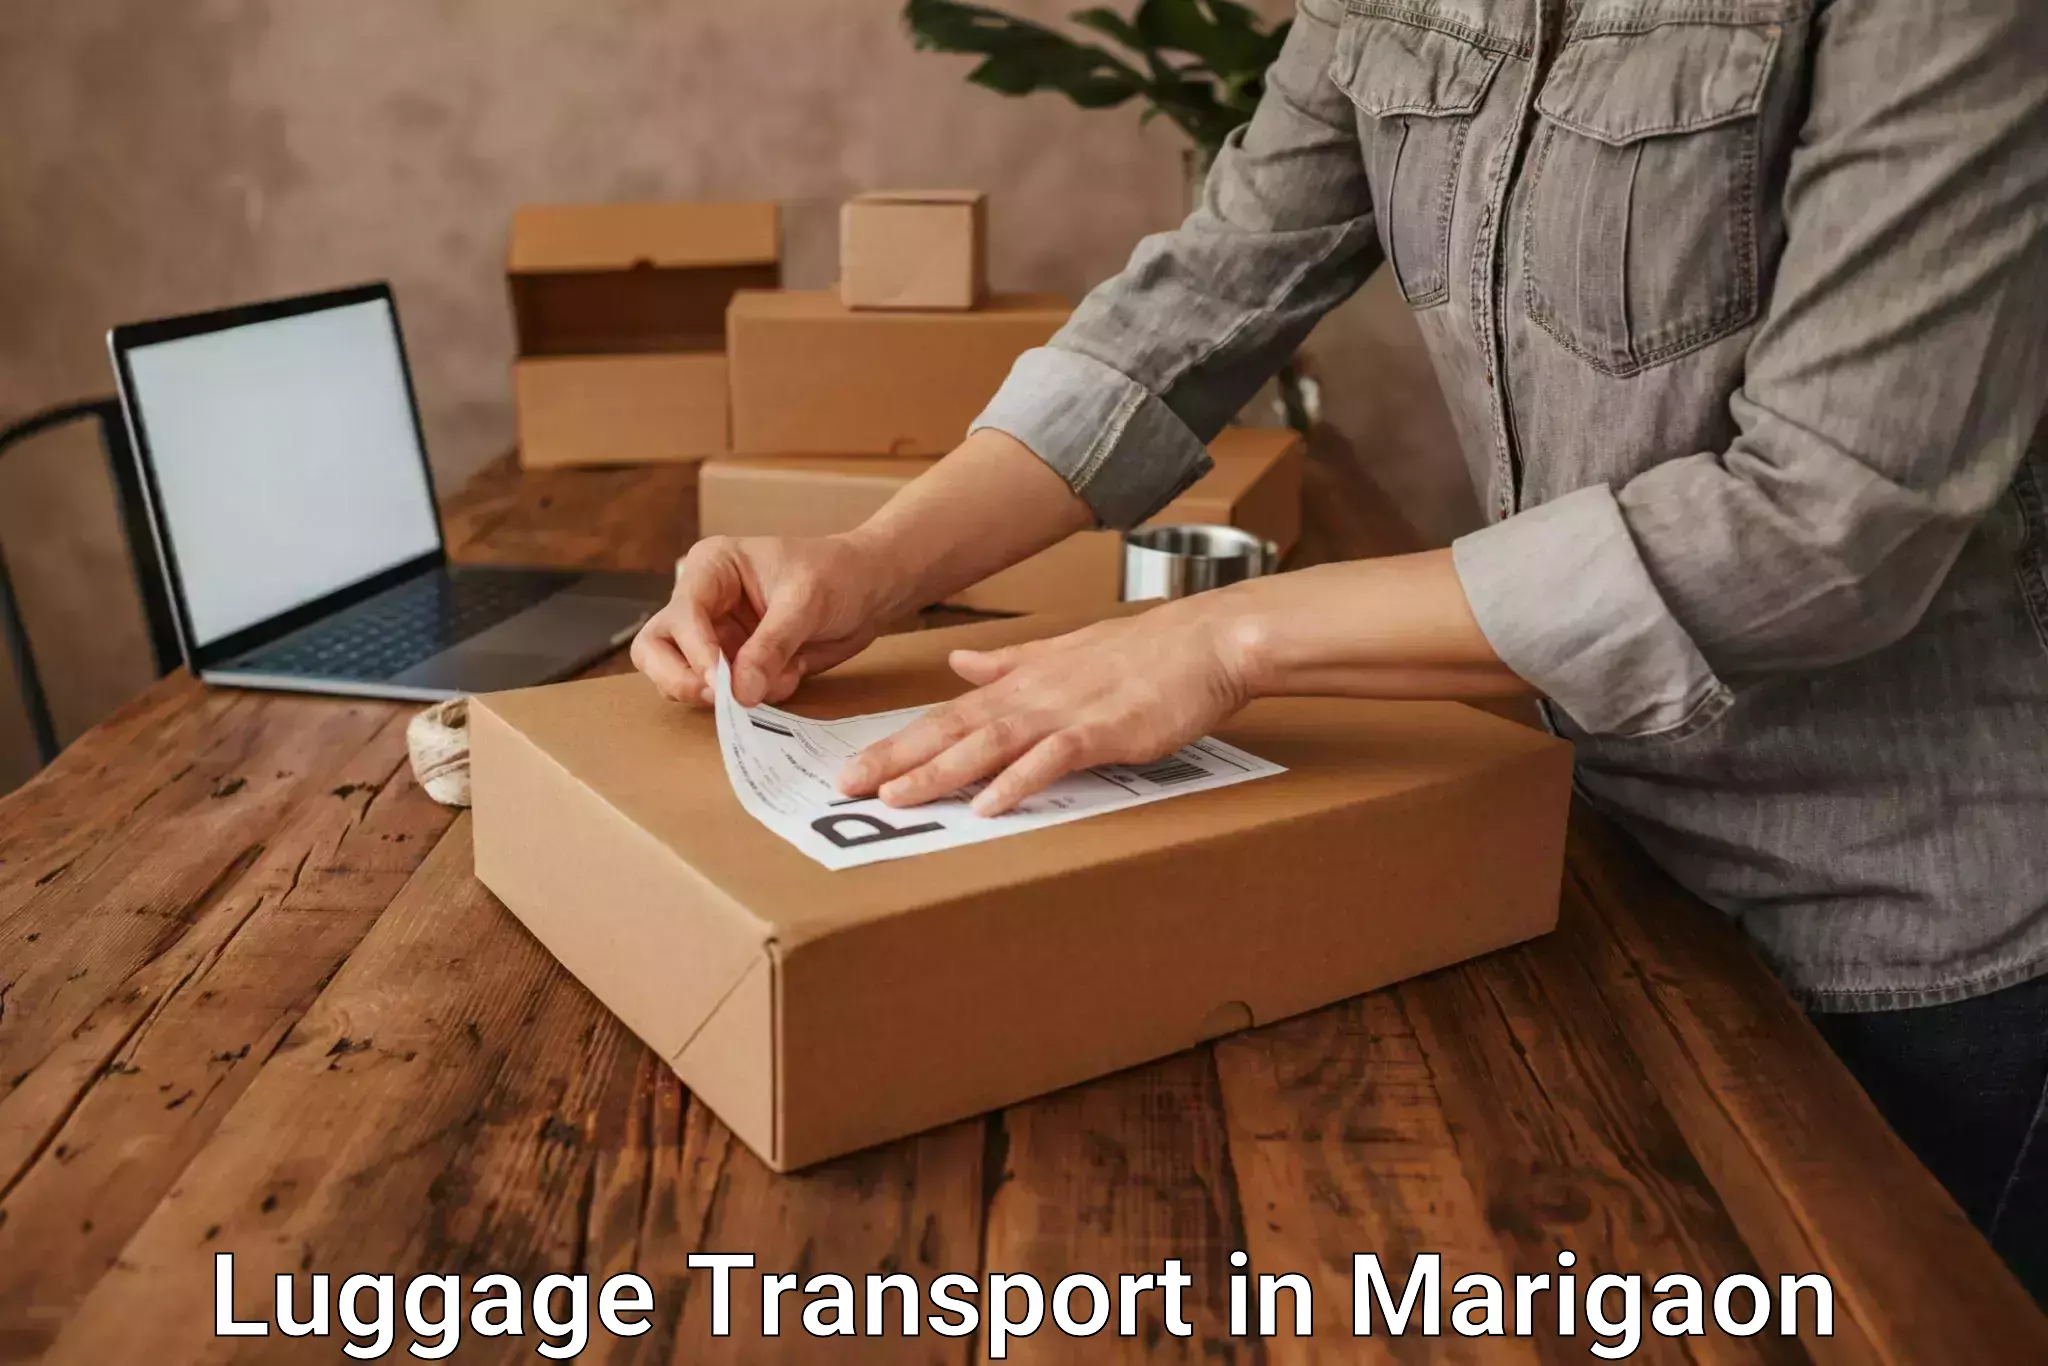 Luggage storage and delivery in Marigaon